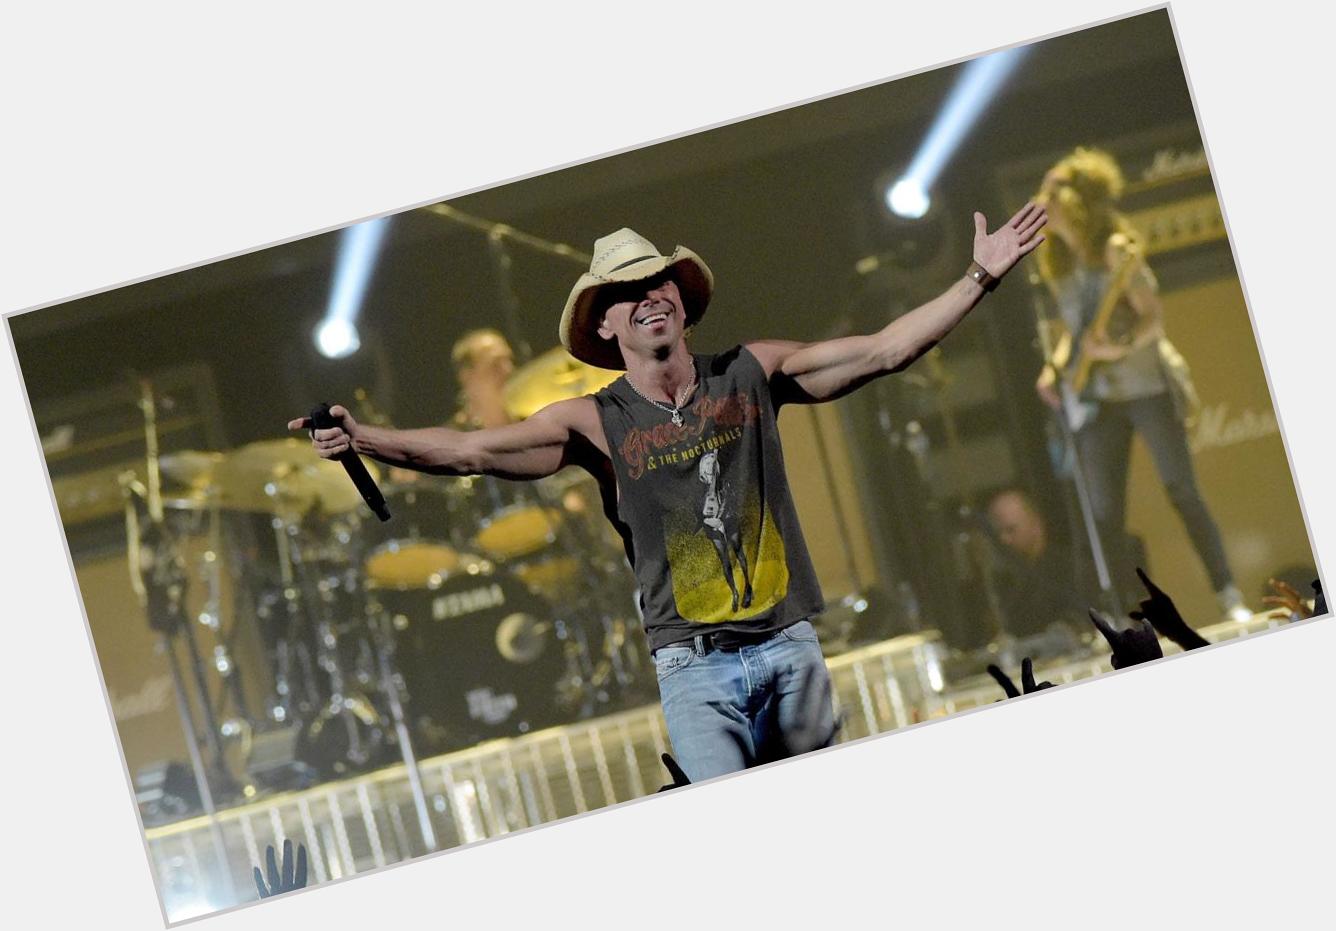 Join us in wishing a very happy birthday to country superstar Kenny Chesney. 